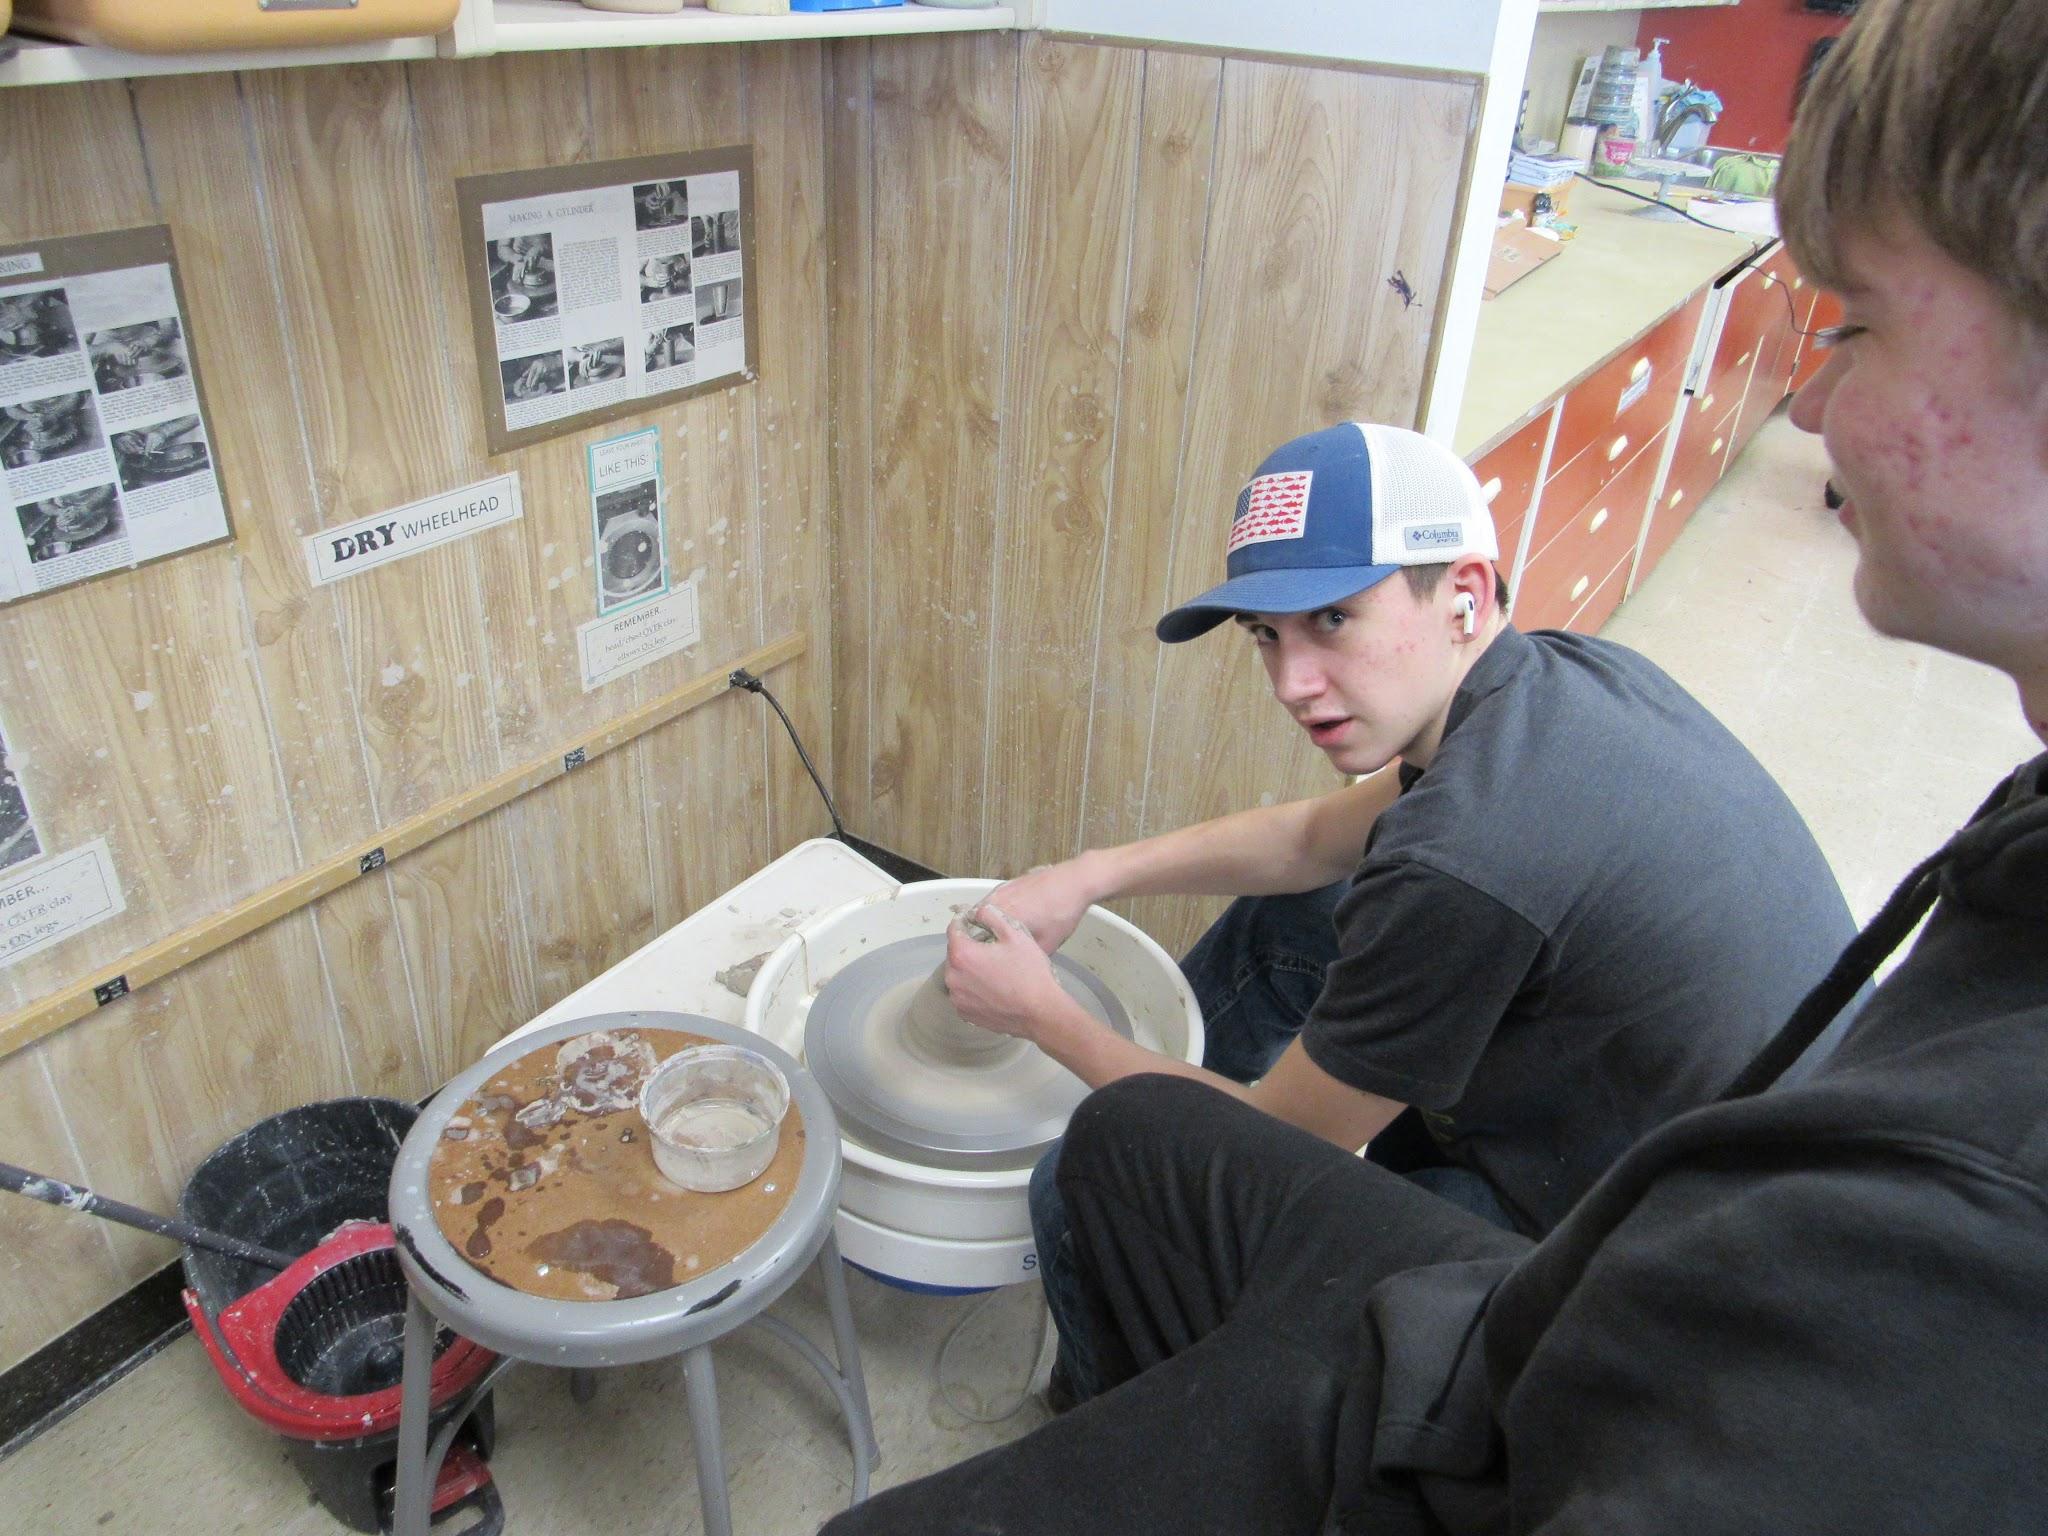 Student working with pottery wheel